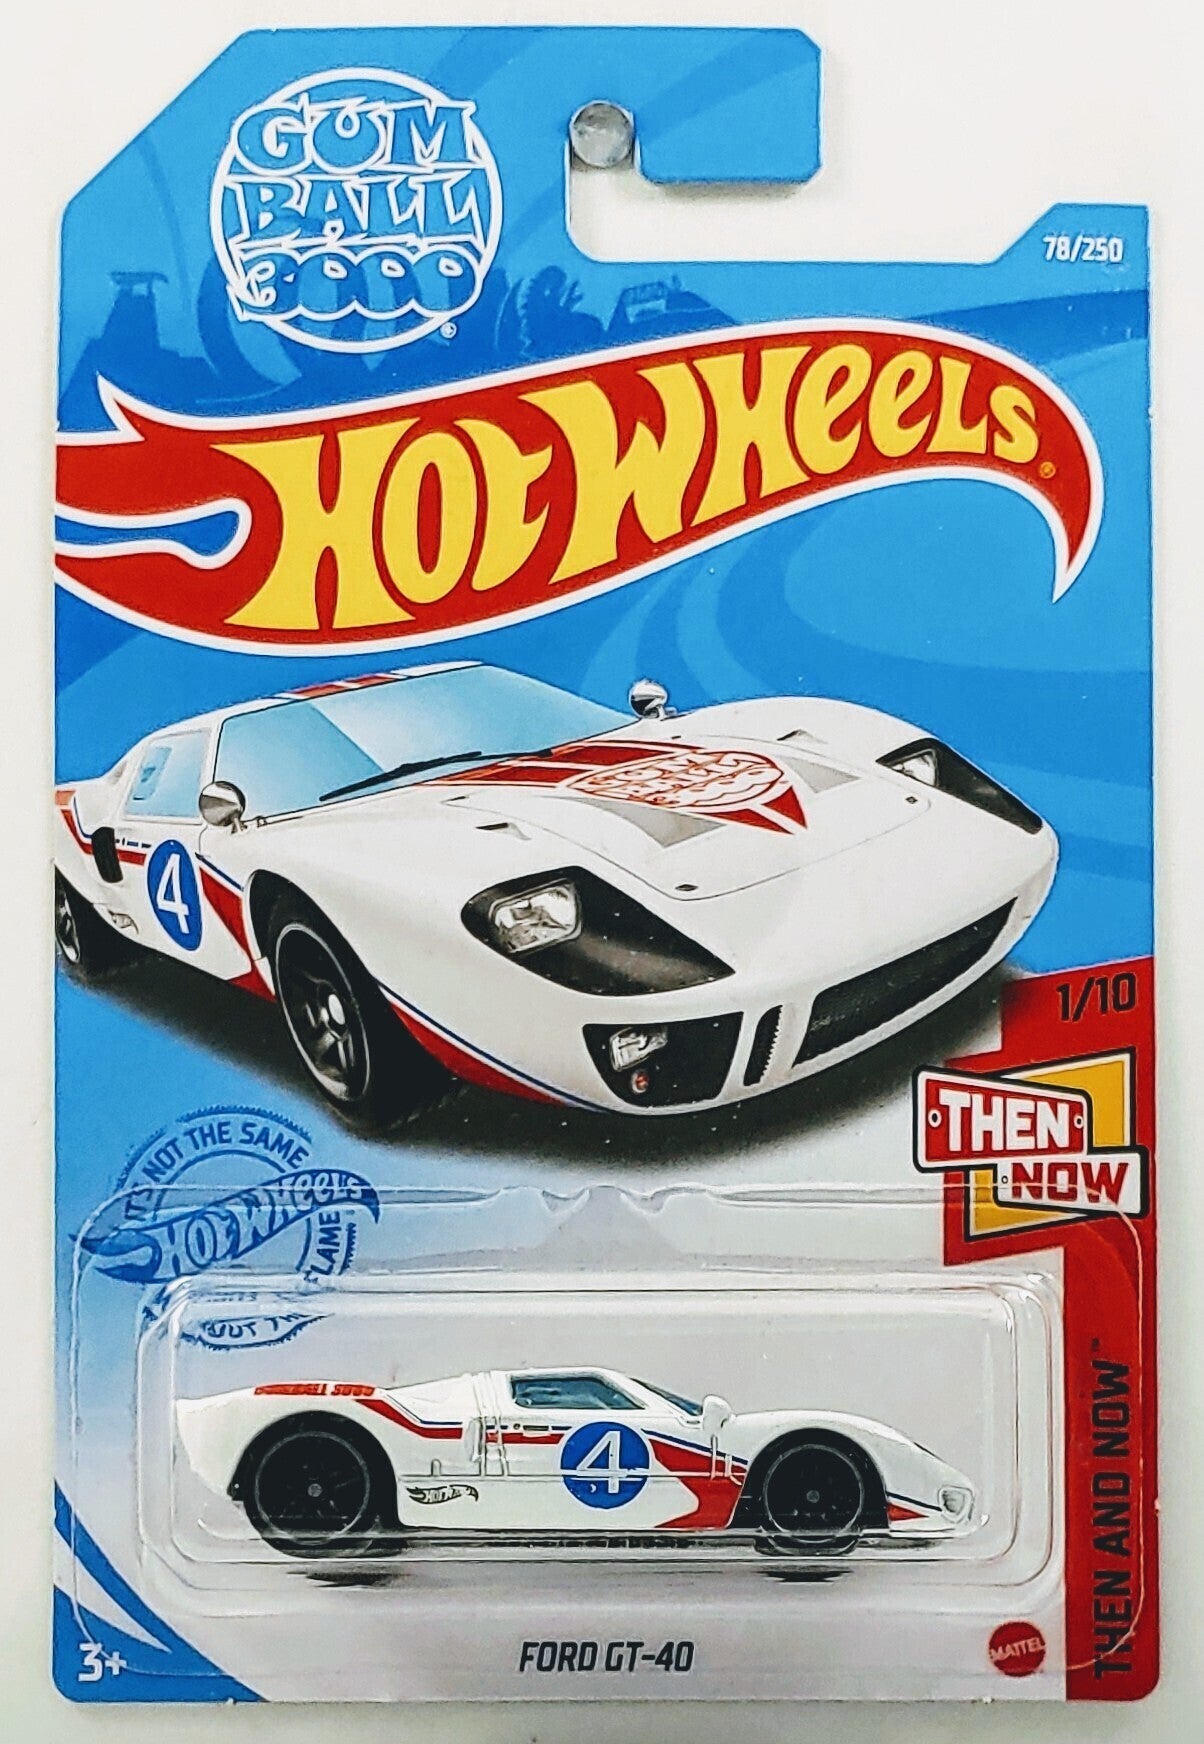 Hot Wheels 2021 - Collector # 078/250 - Then And Now 1/10 - Ford GT-40 - White / Gum Ball 3000 - IC